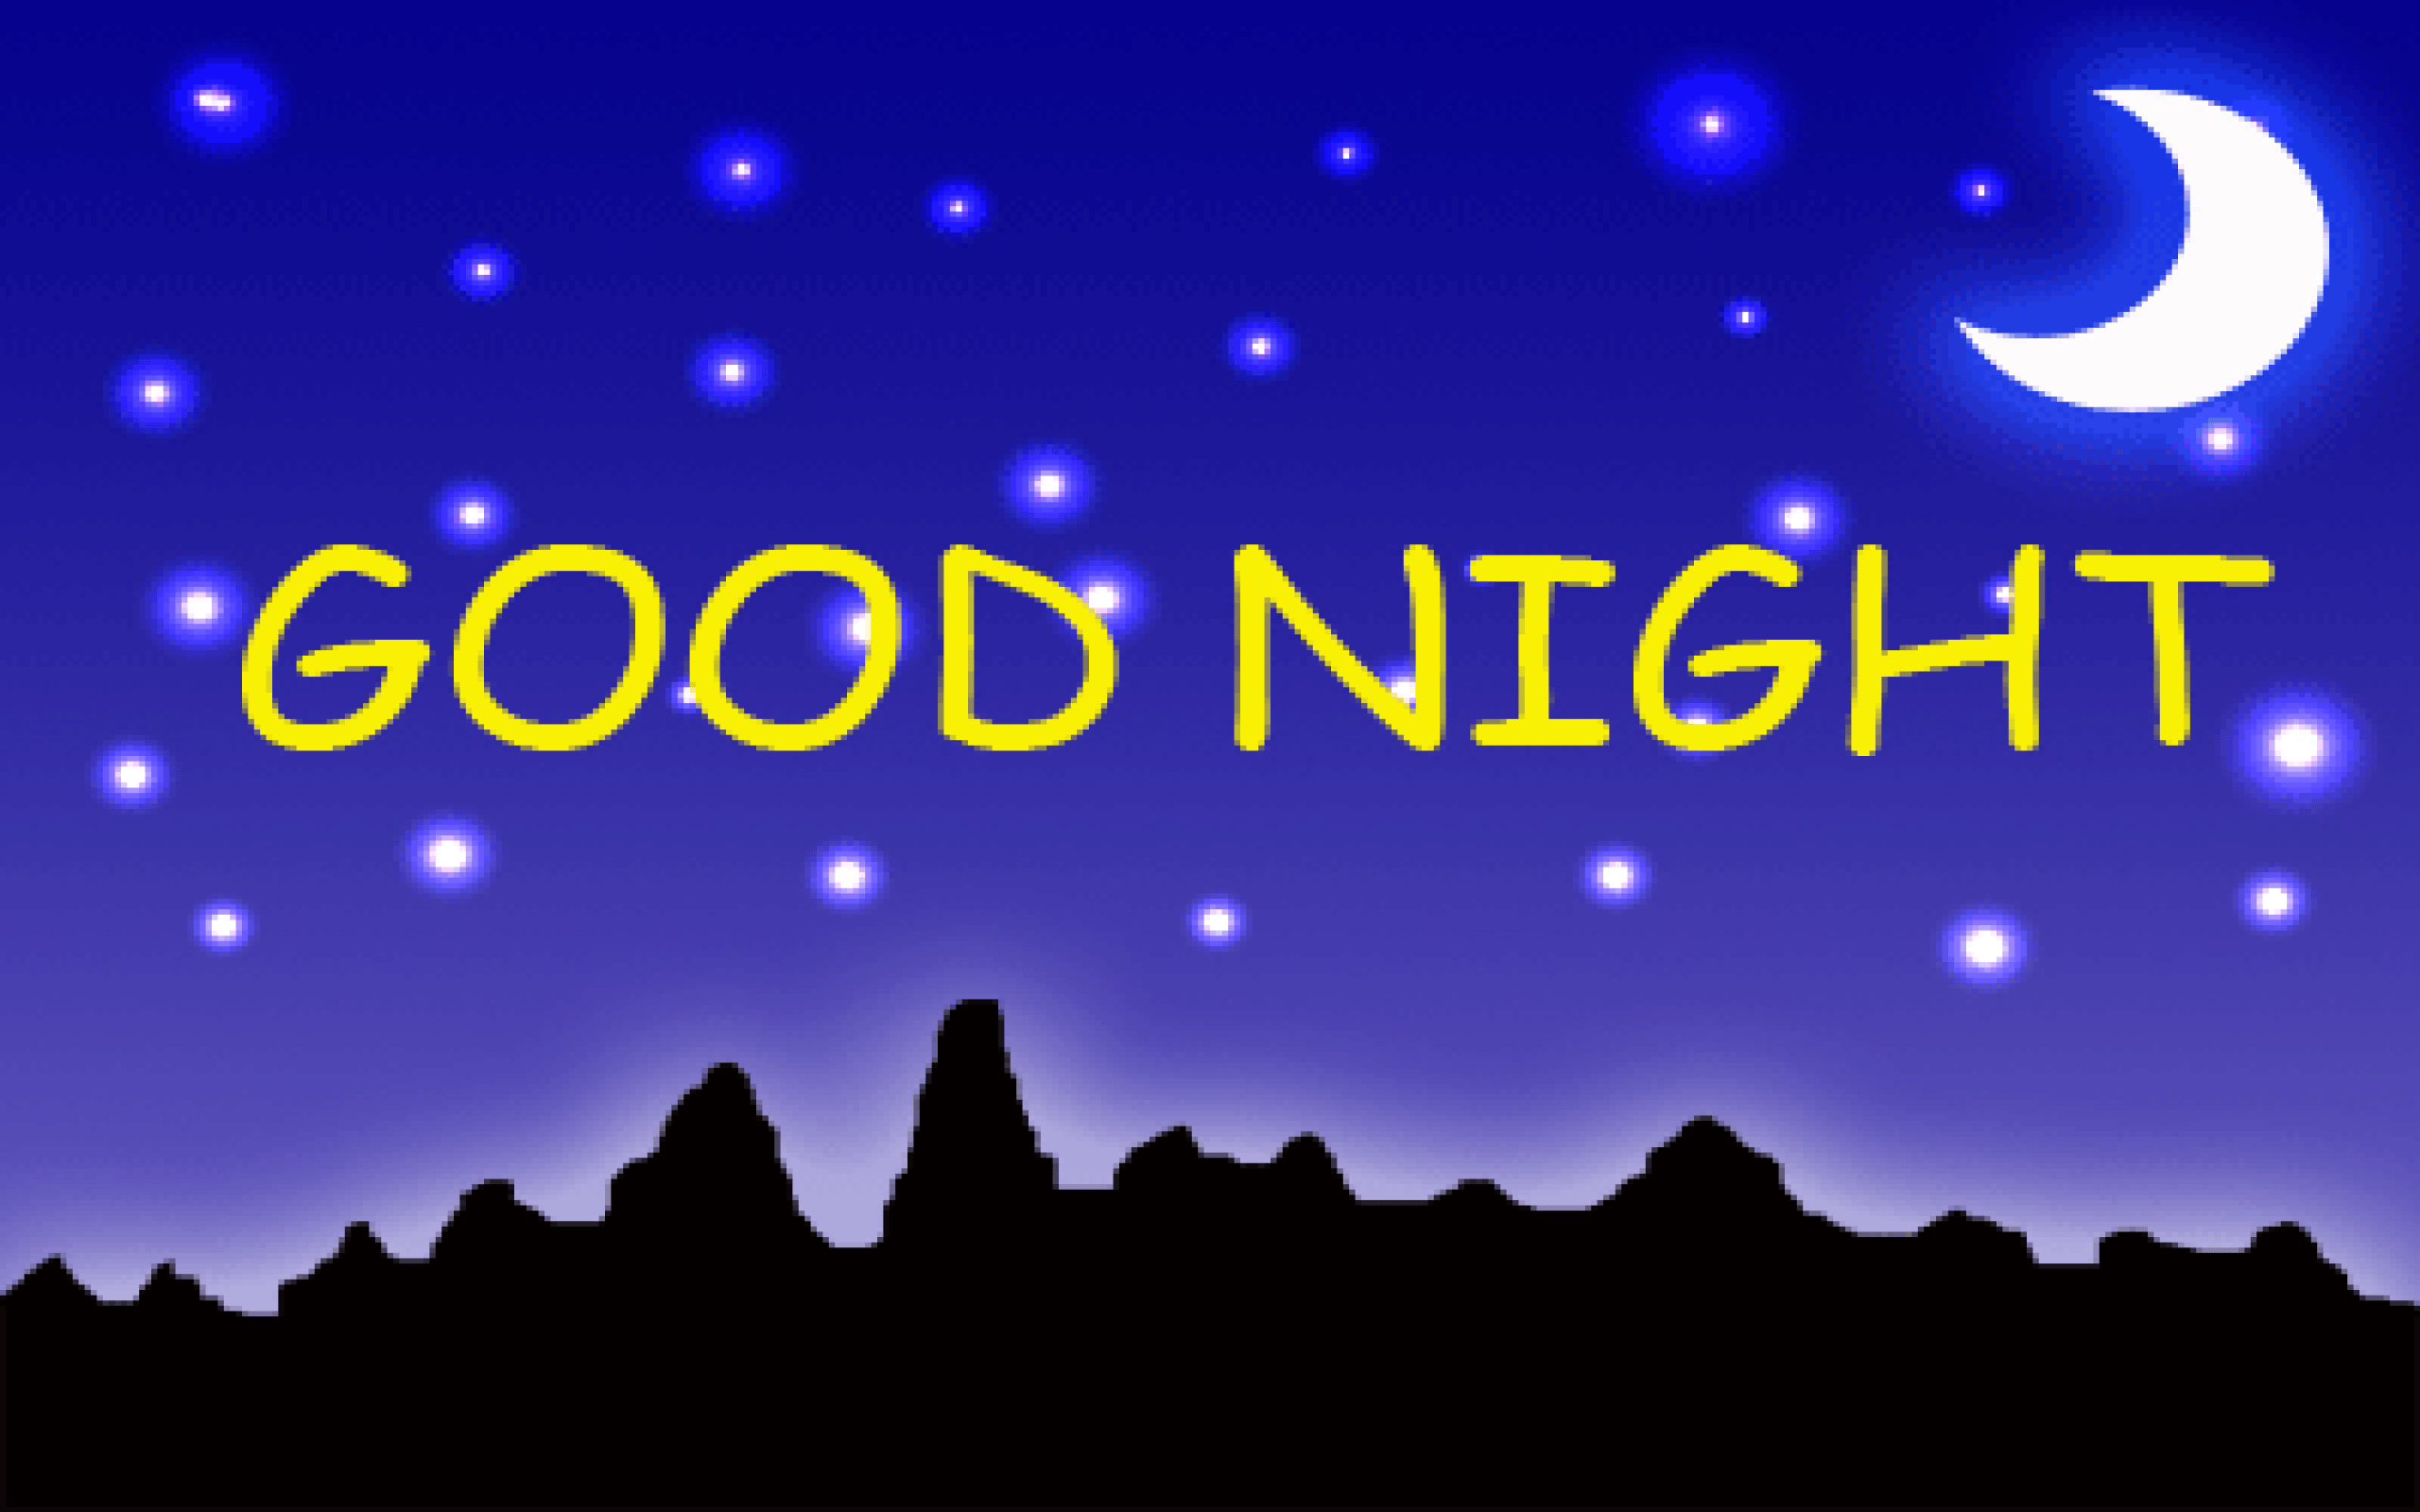 HD Wallpaper Of Good Night Wishes / Wallpaper Database